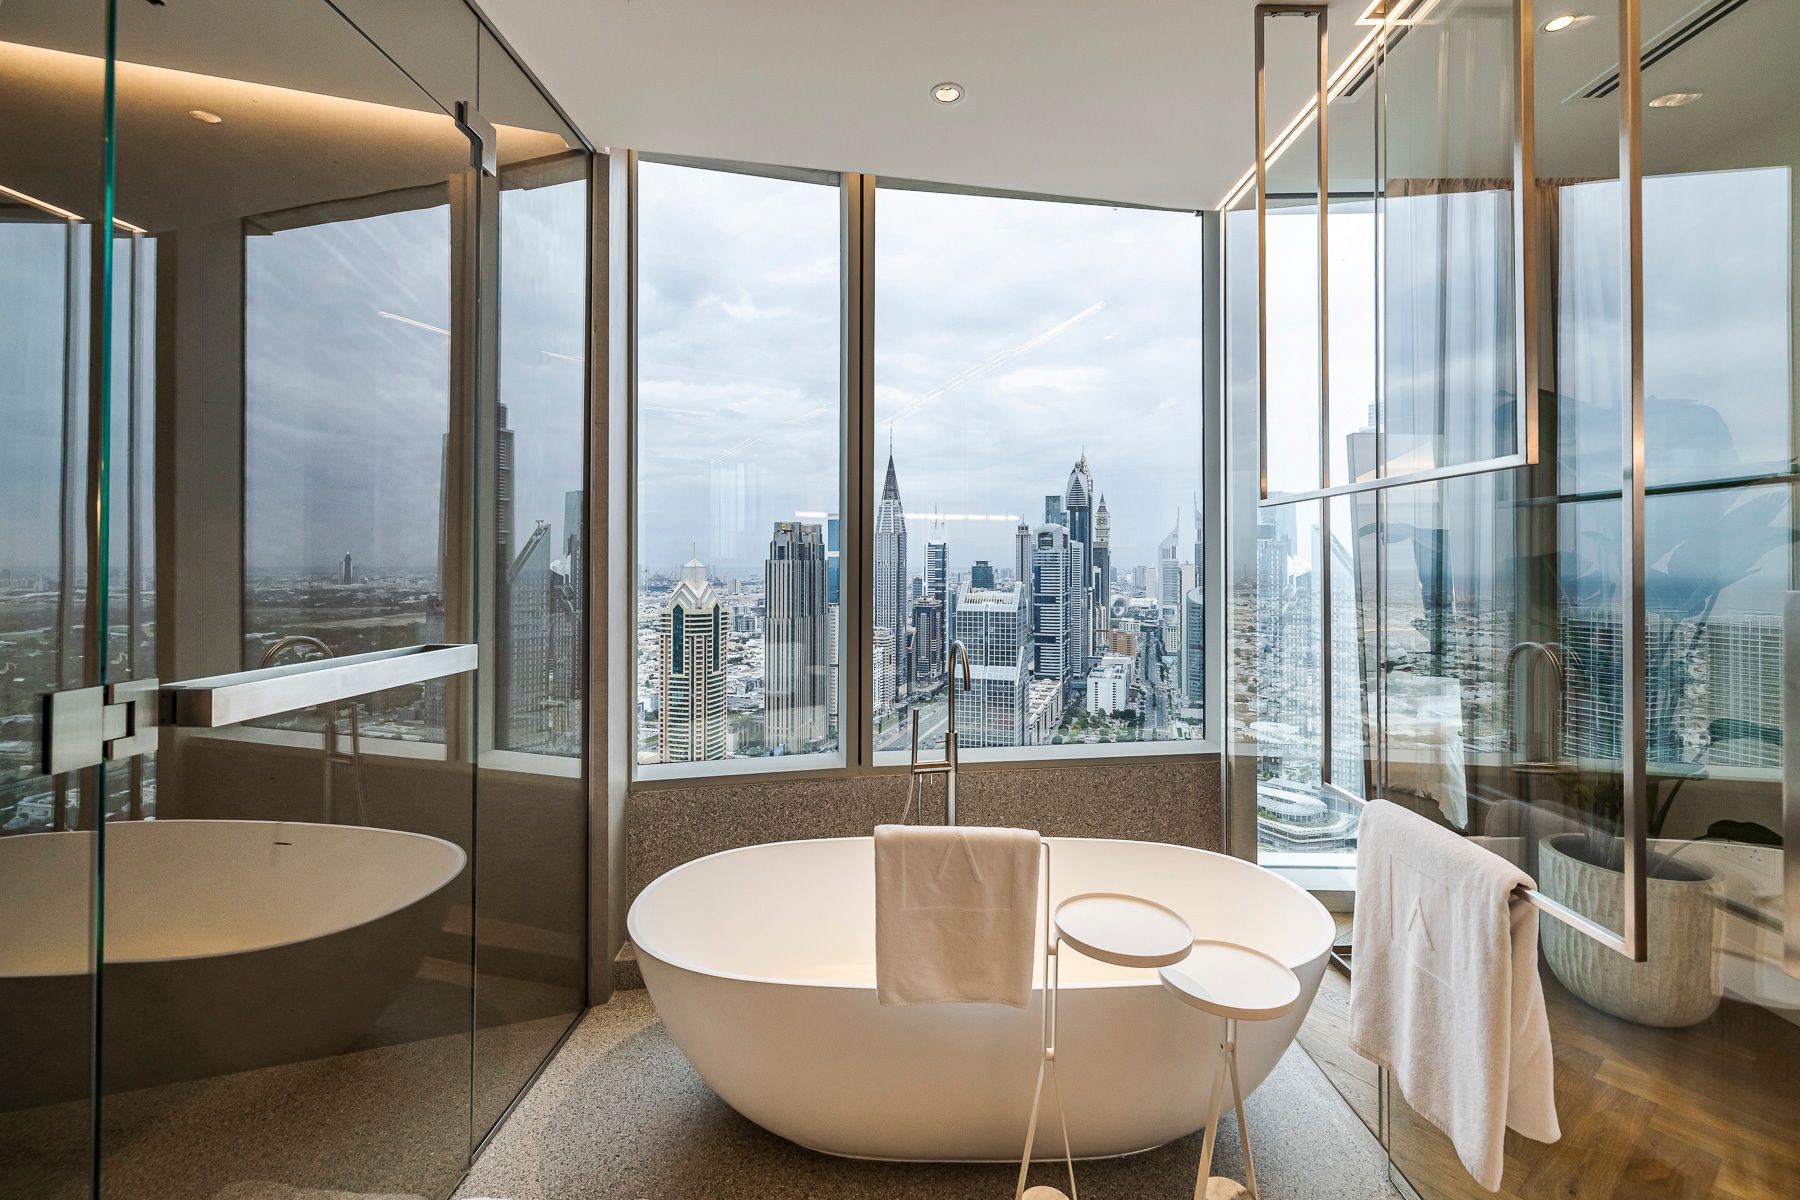 A bathtub in front of a window showing a vast city skyline